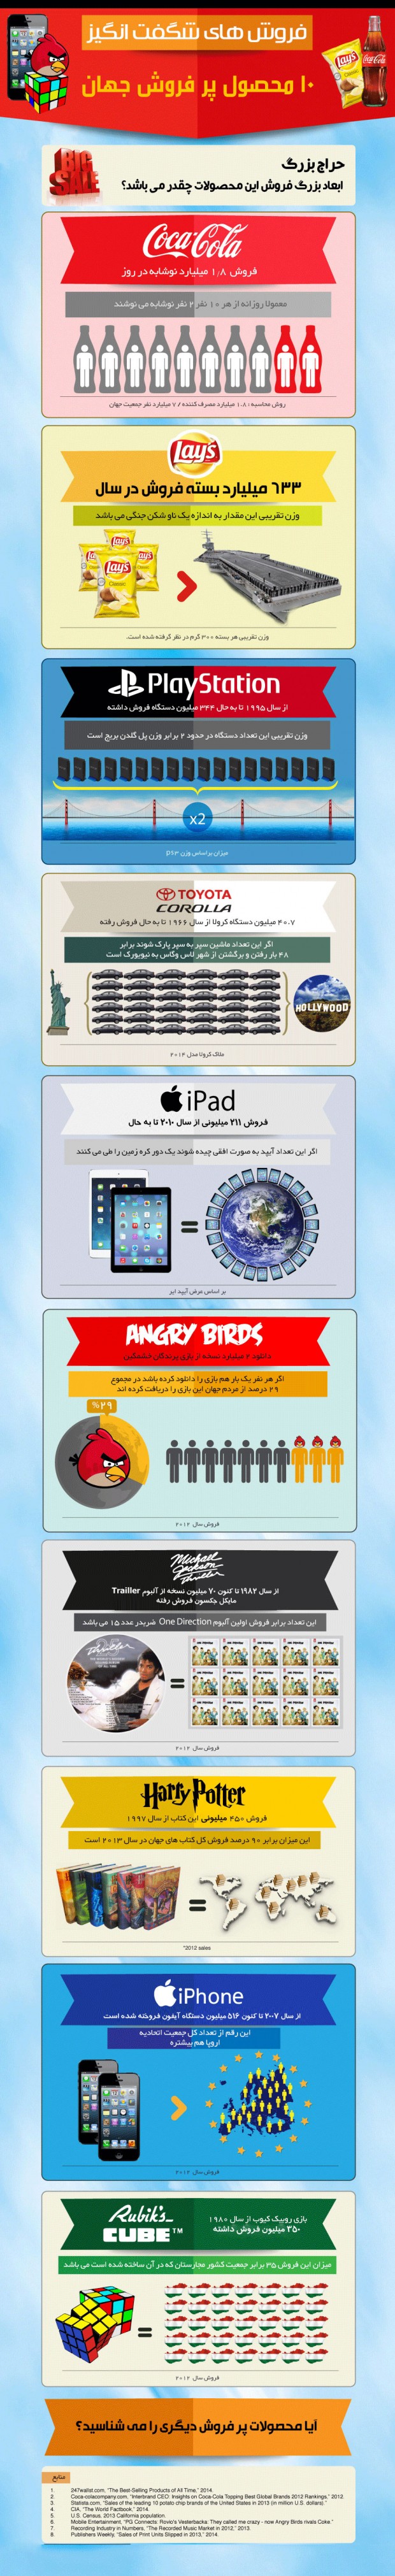 best-selling-products-infog